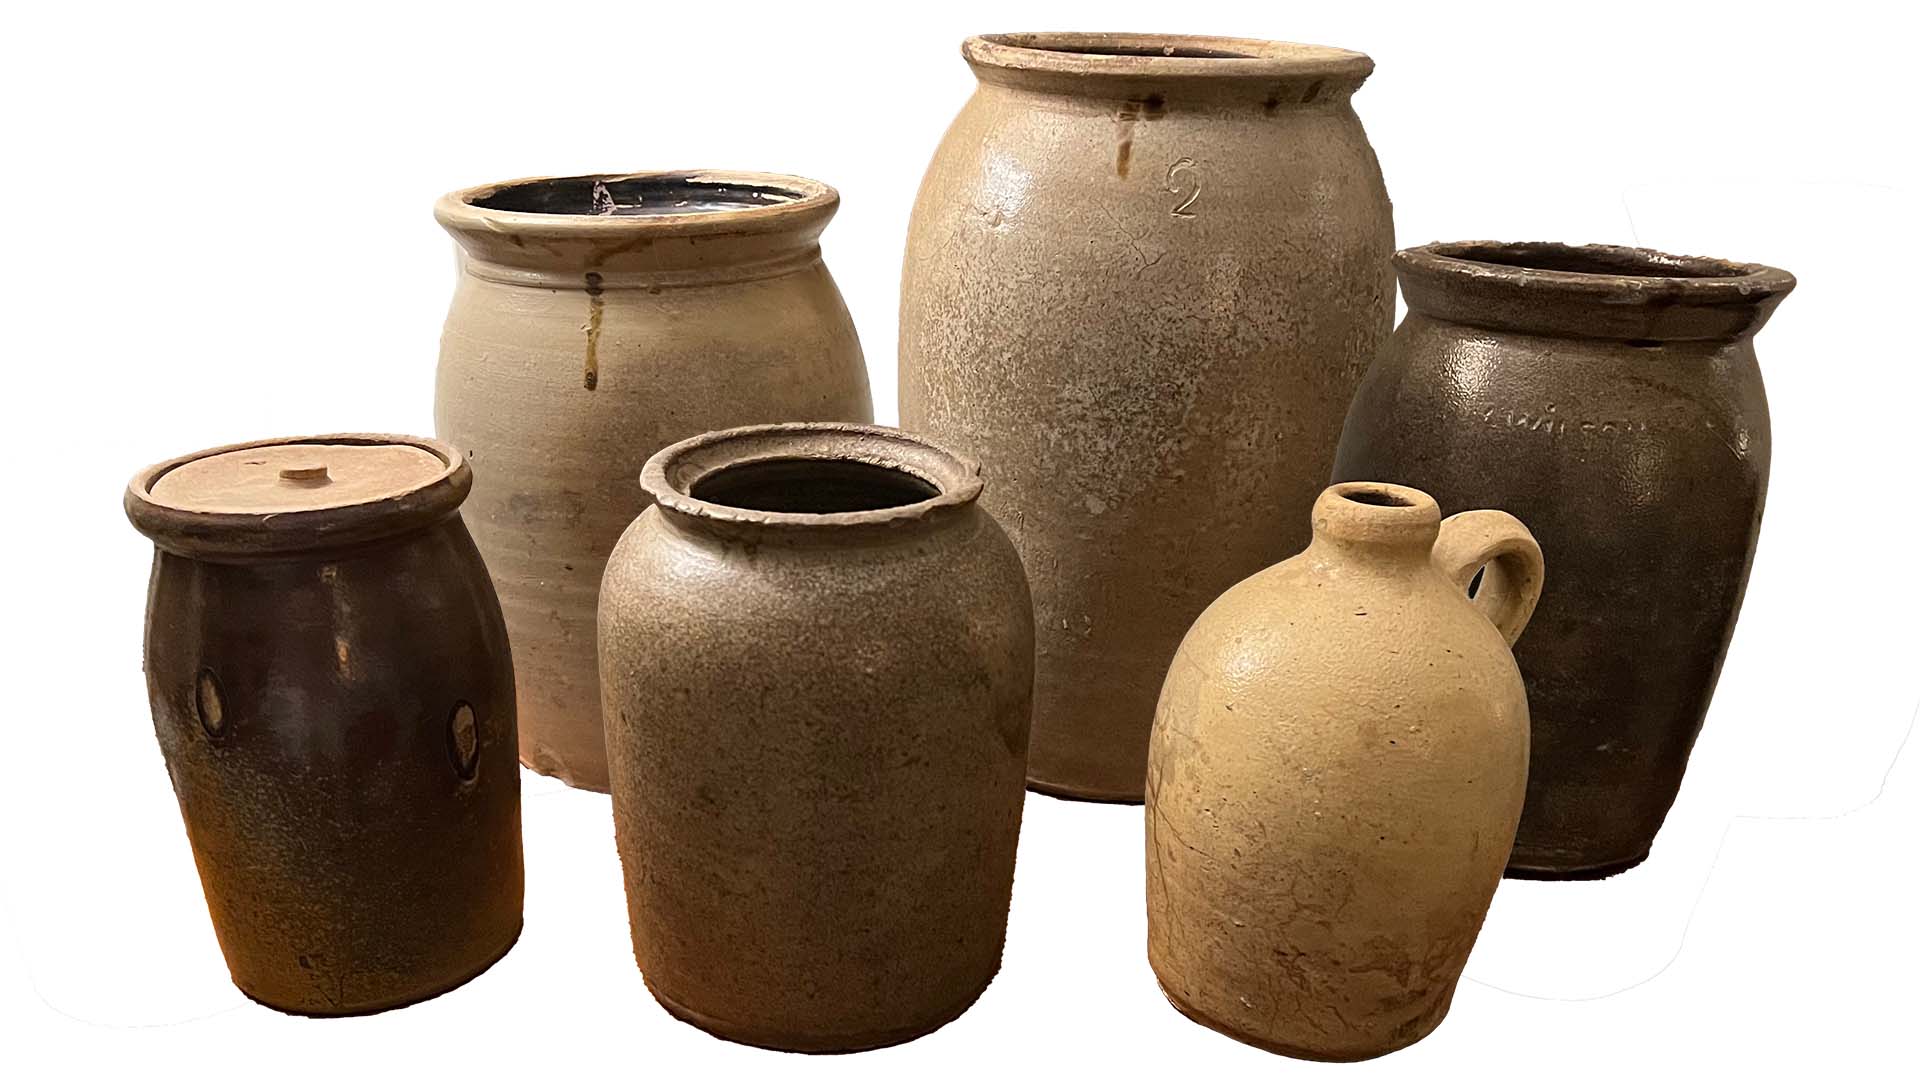 Special Event: Celebrating Black History Month with Wilson Pottery